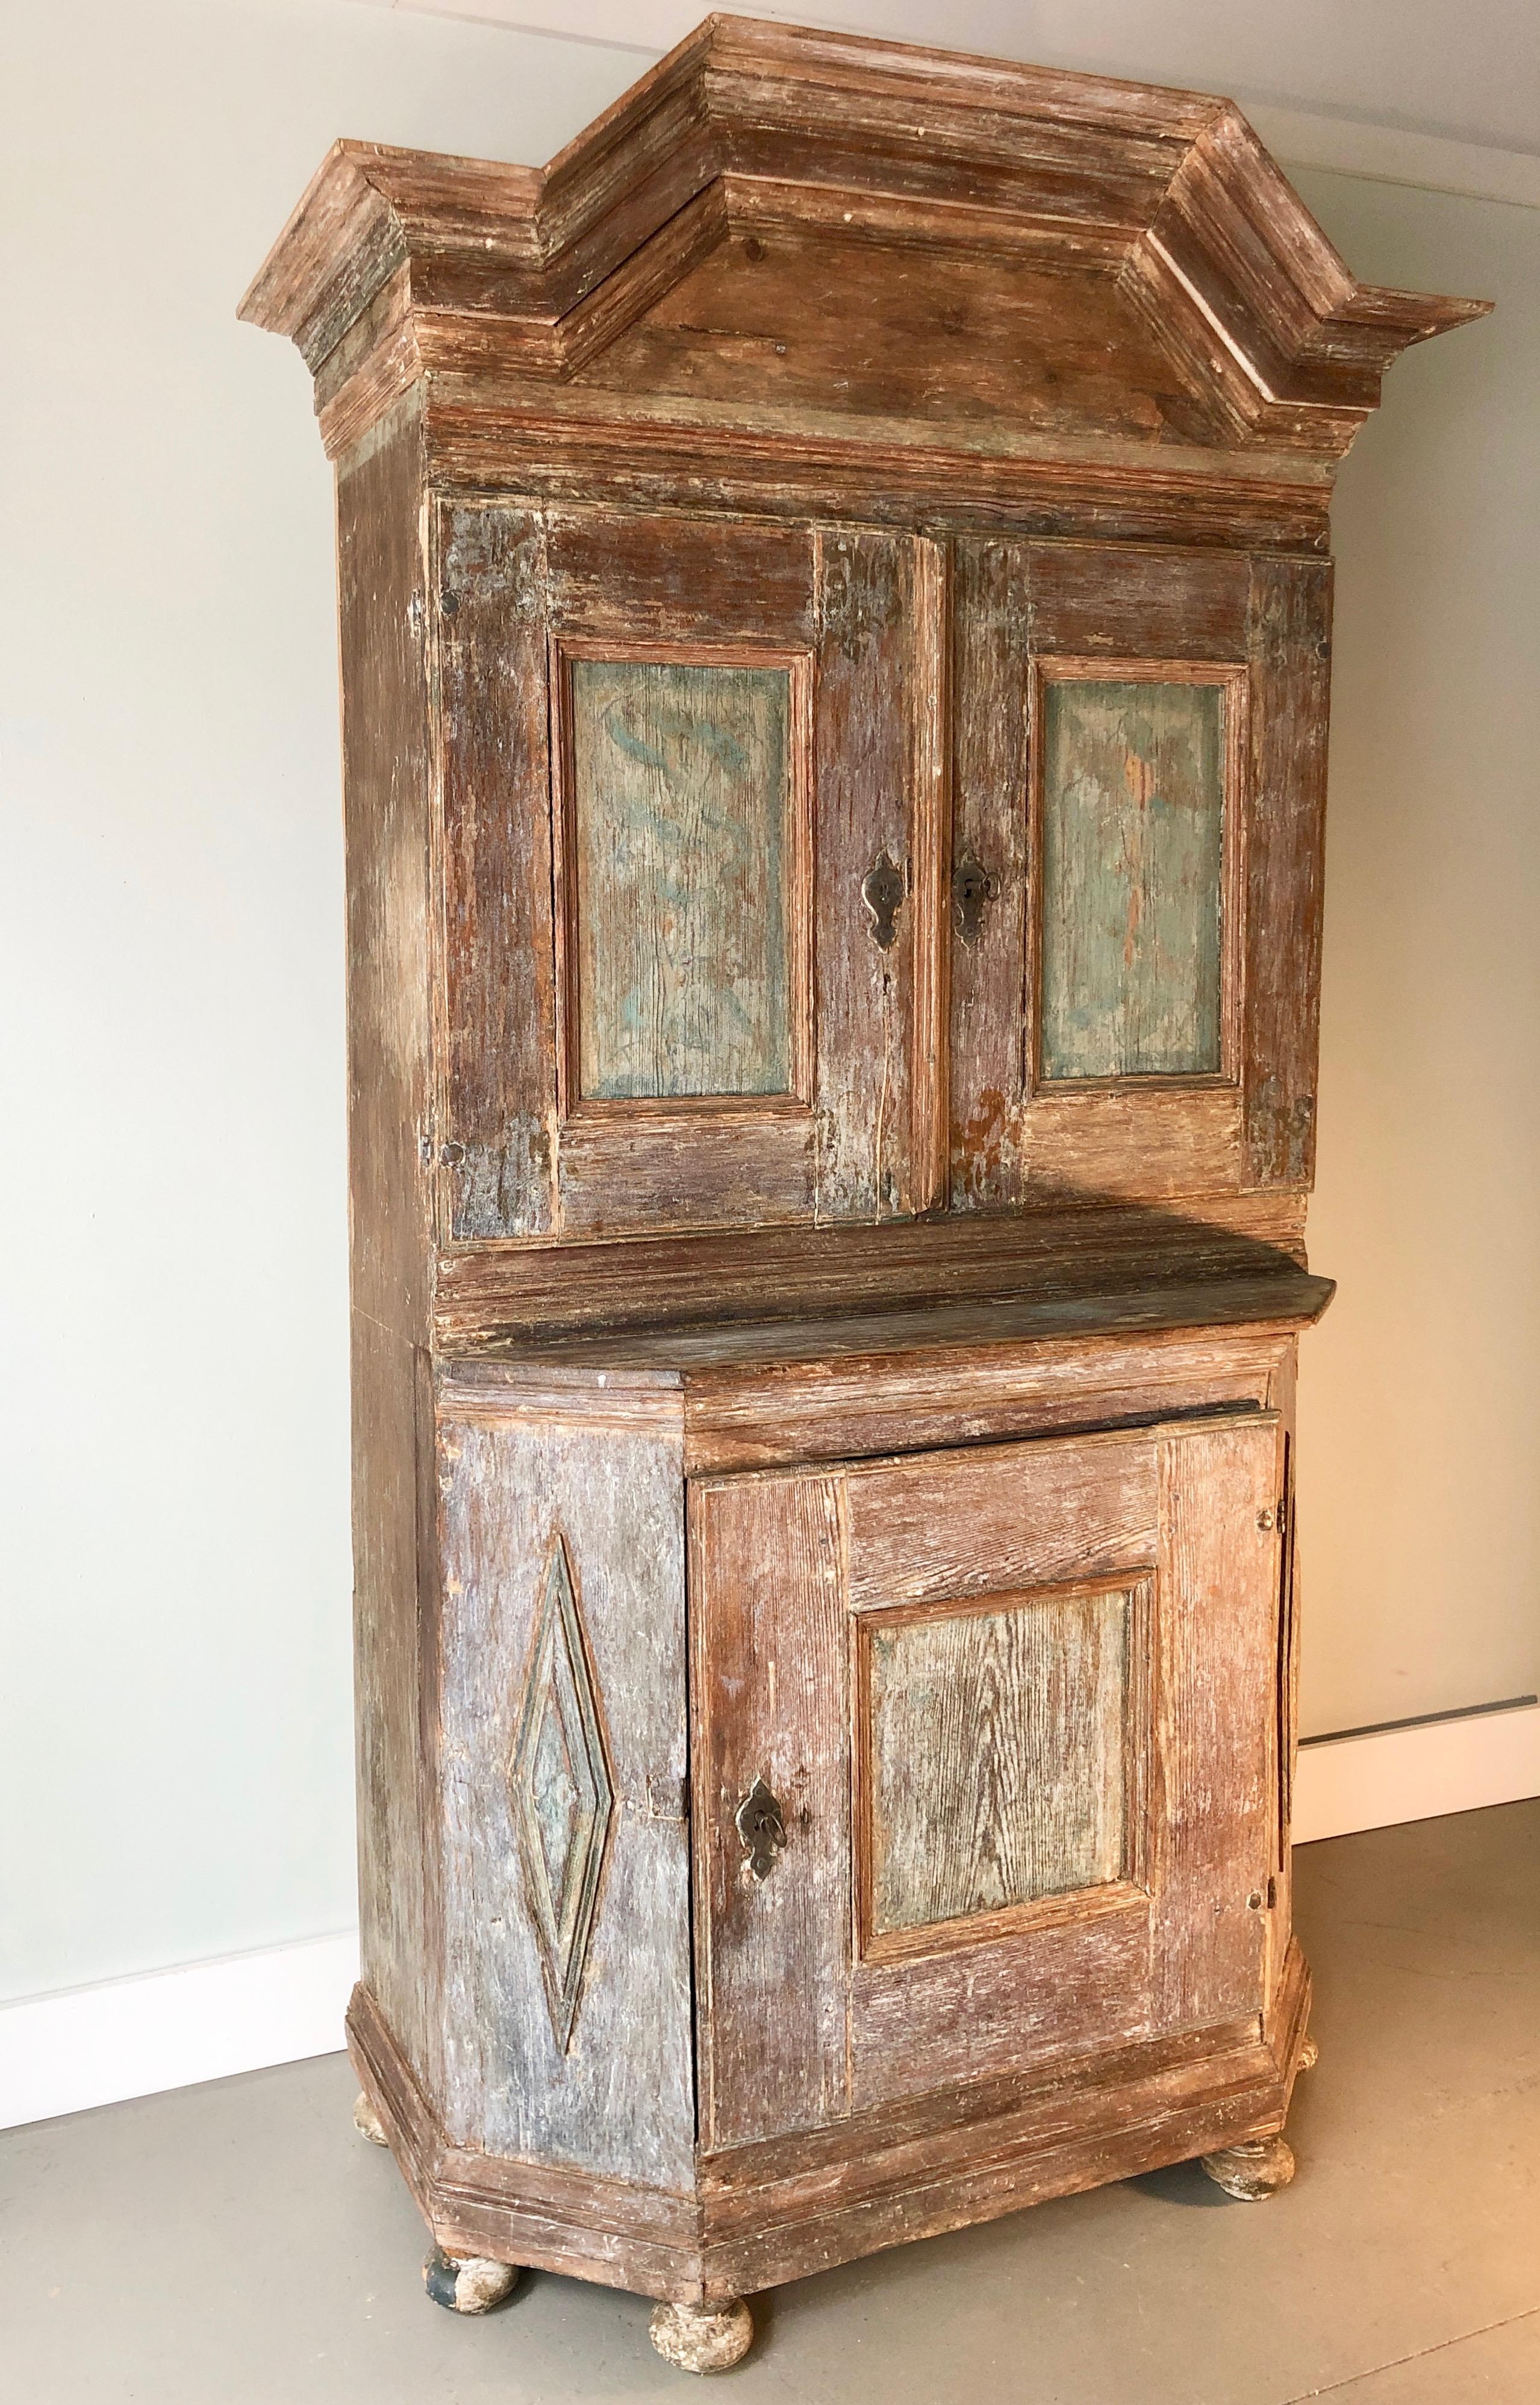 Handsome, 18th century Swedish period cabinet, circa 1750 with wonderful pediment cornice and carved cupboard doors, original iron hardware’s, two shelves, one shaped and notched for spoons. Rare and handsome piece for any room.
More than ever, we